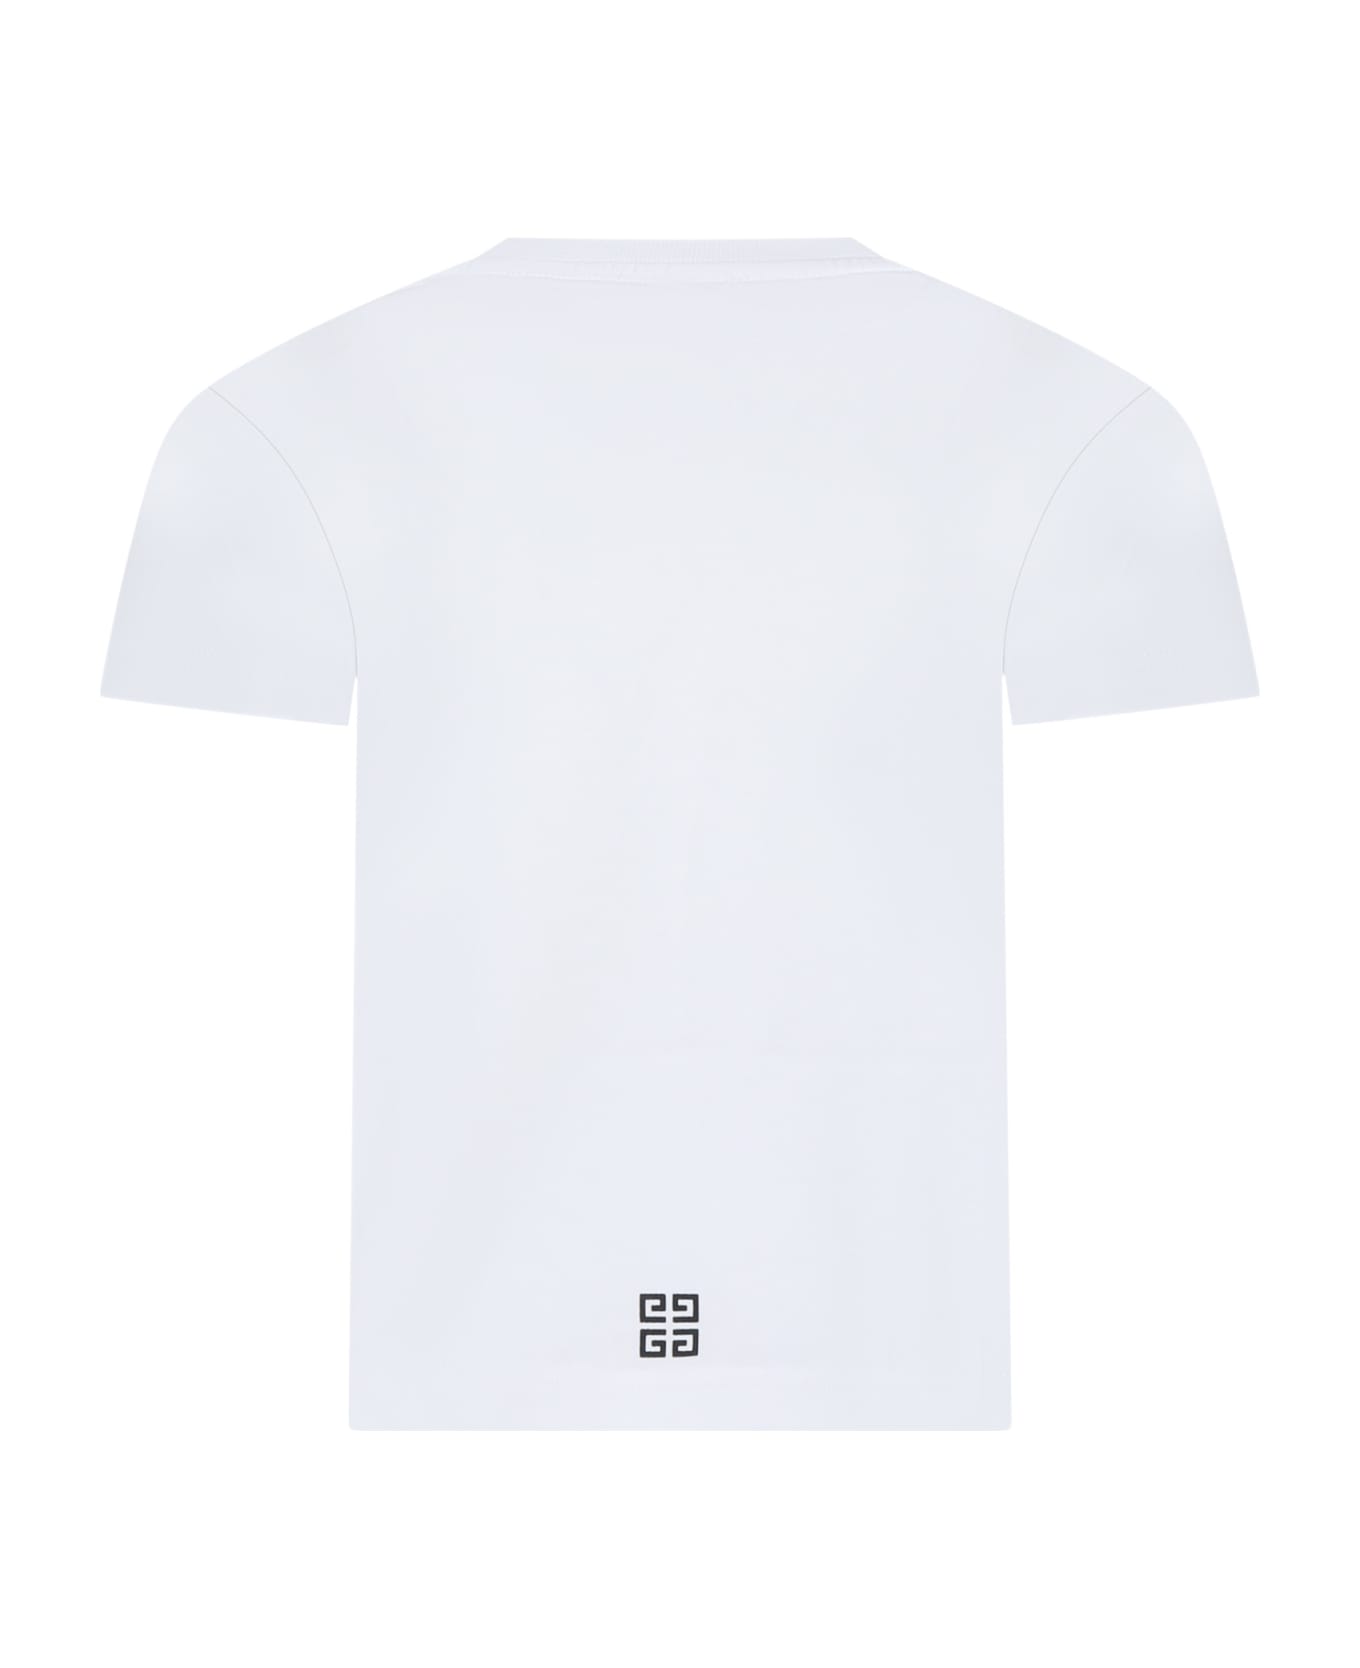 Givenchy White T-shirt For Kids With Logo - White